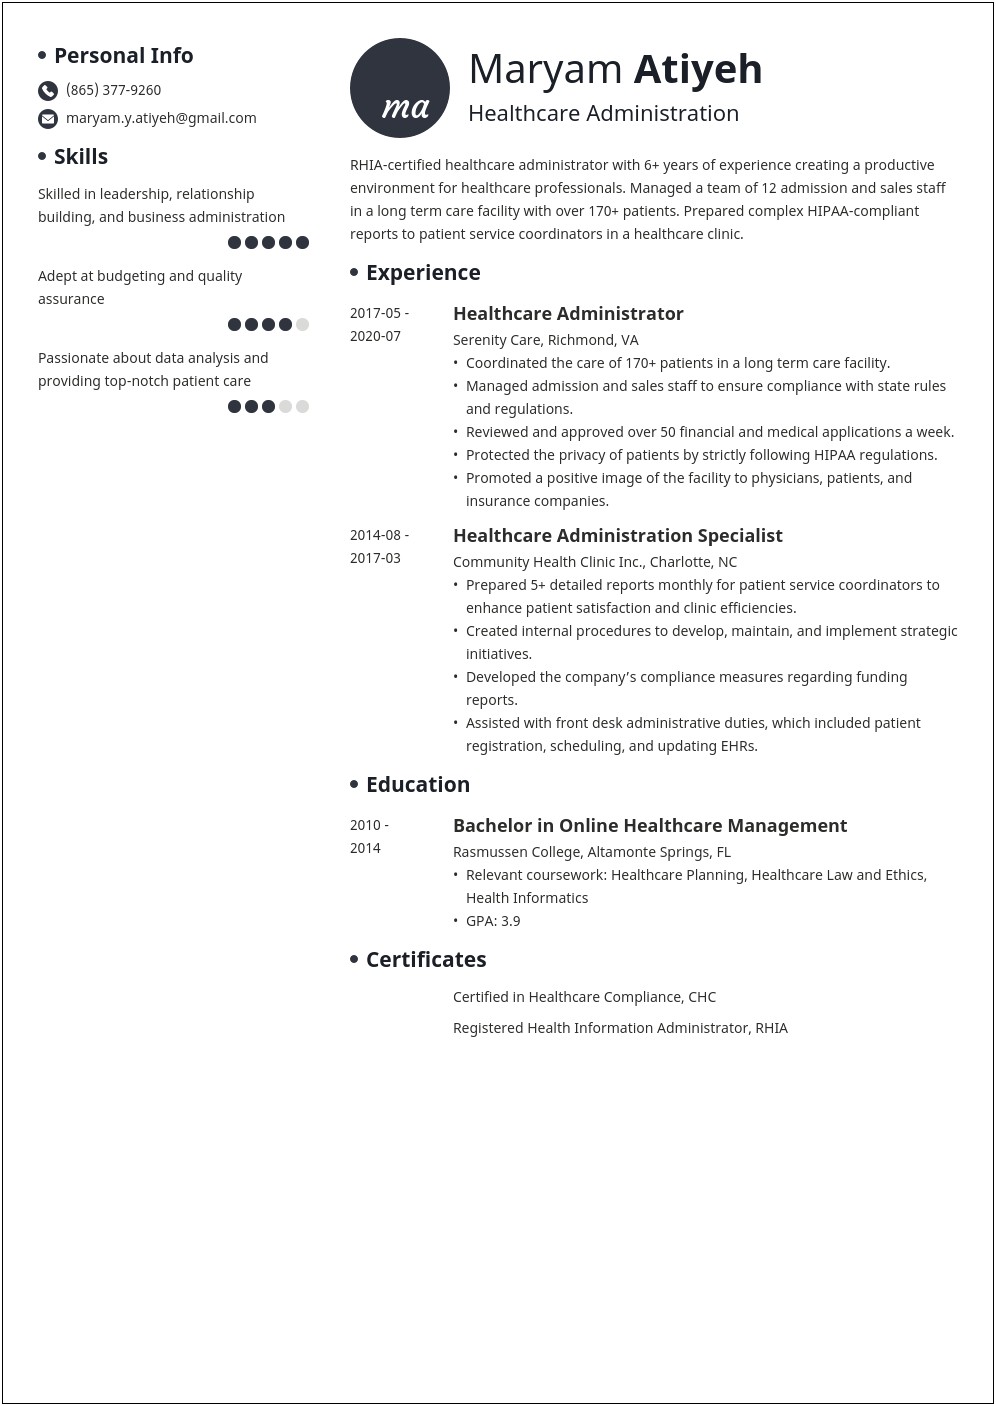 Resume Objective Examples For Healthcare Management